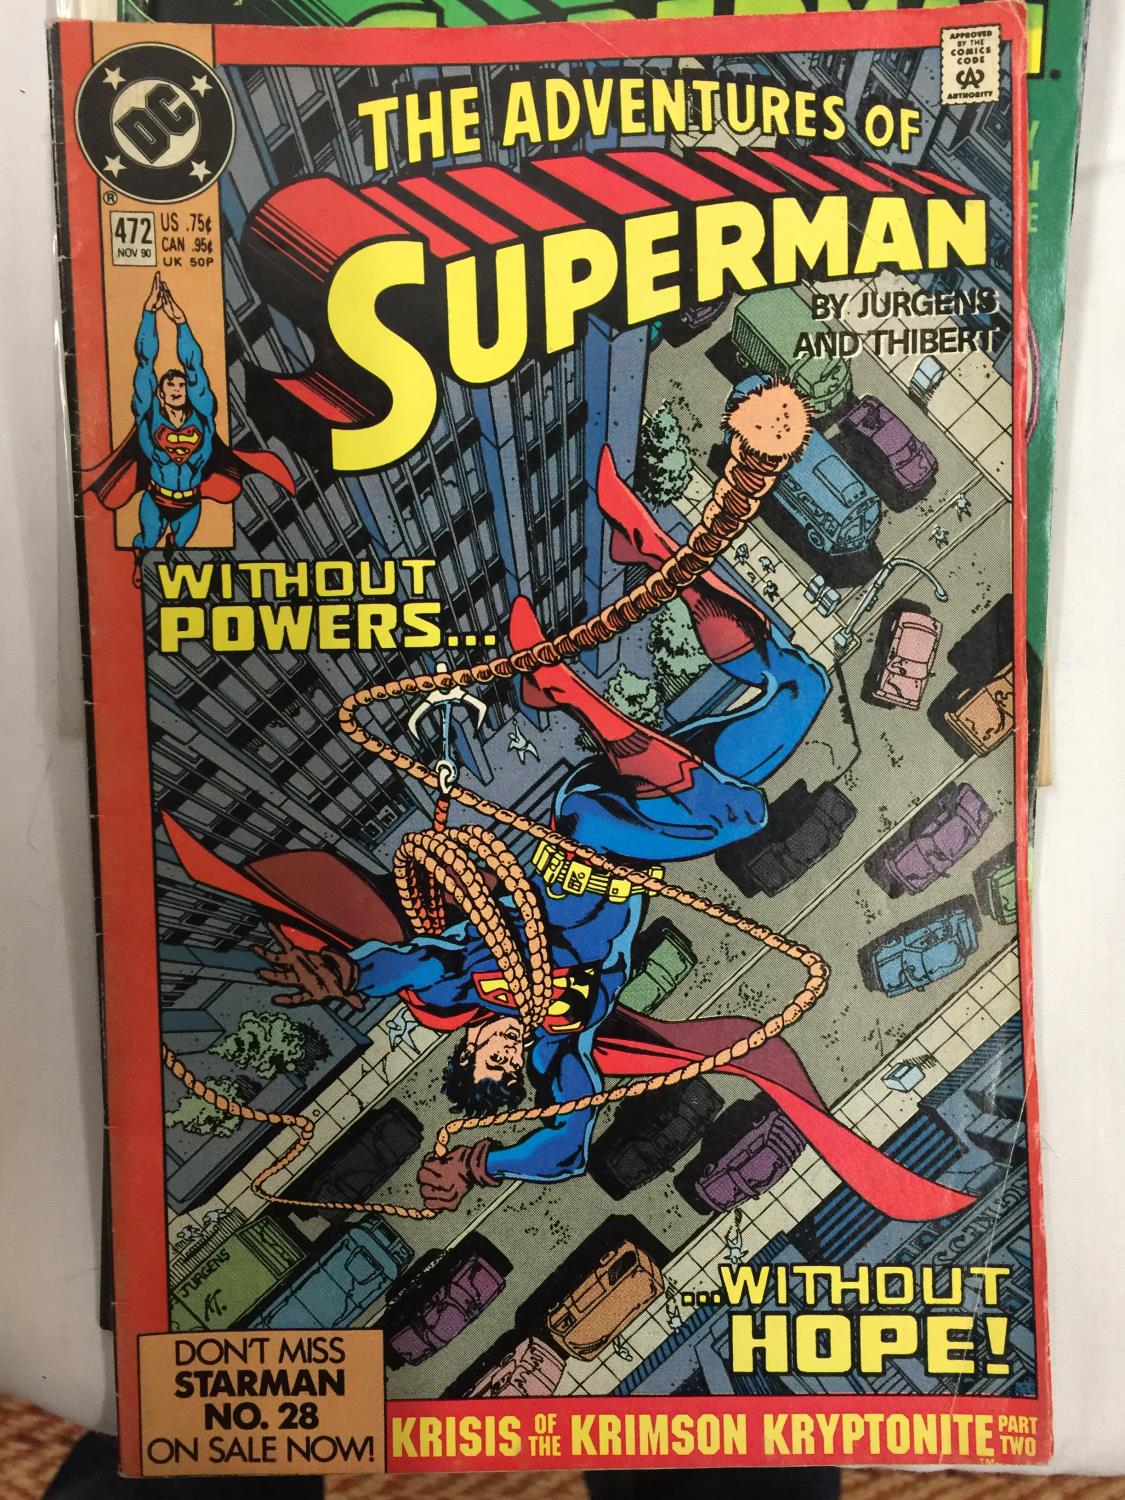 A LARGE COLLECTION OF 57 DC SUPERMAN COMICS DATED BETWEEN 1978 - 1995